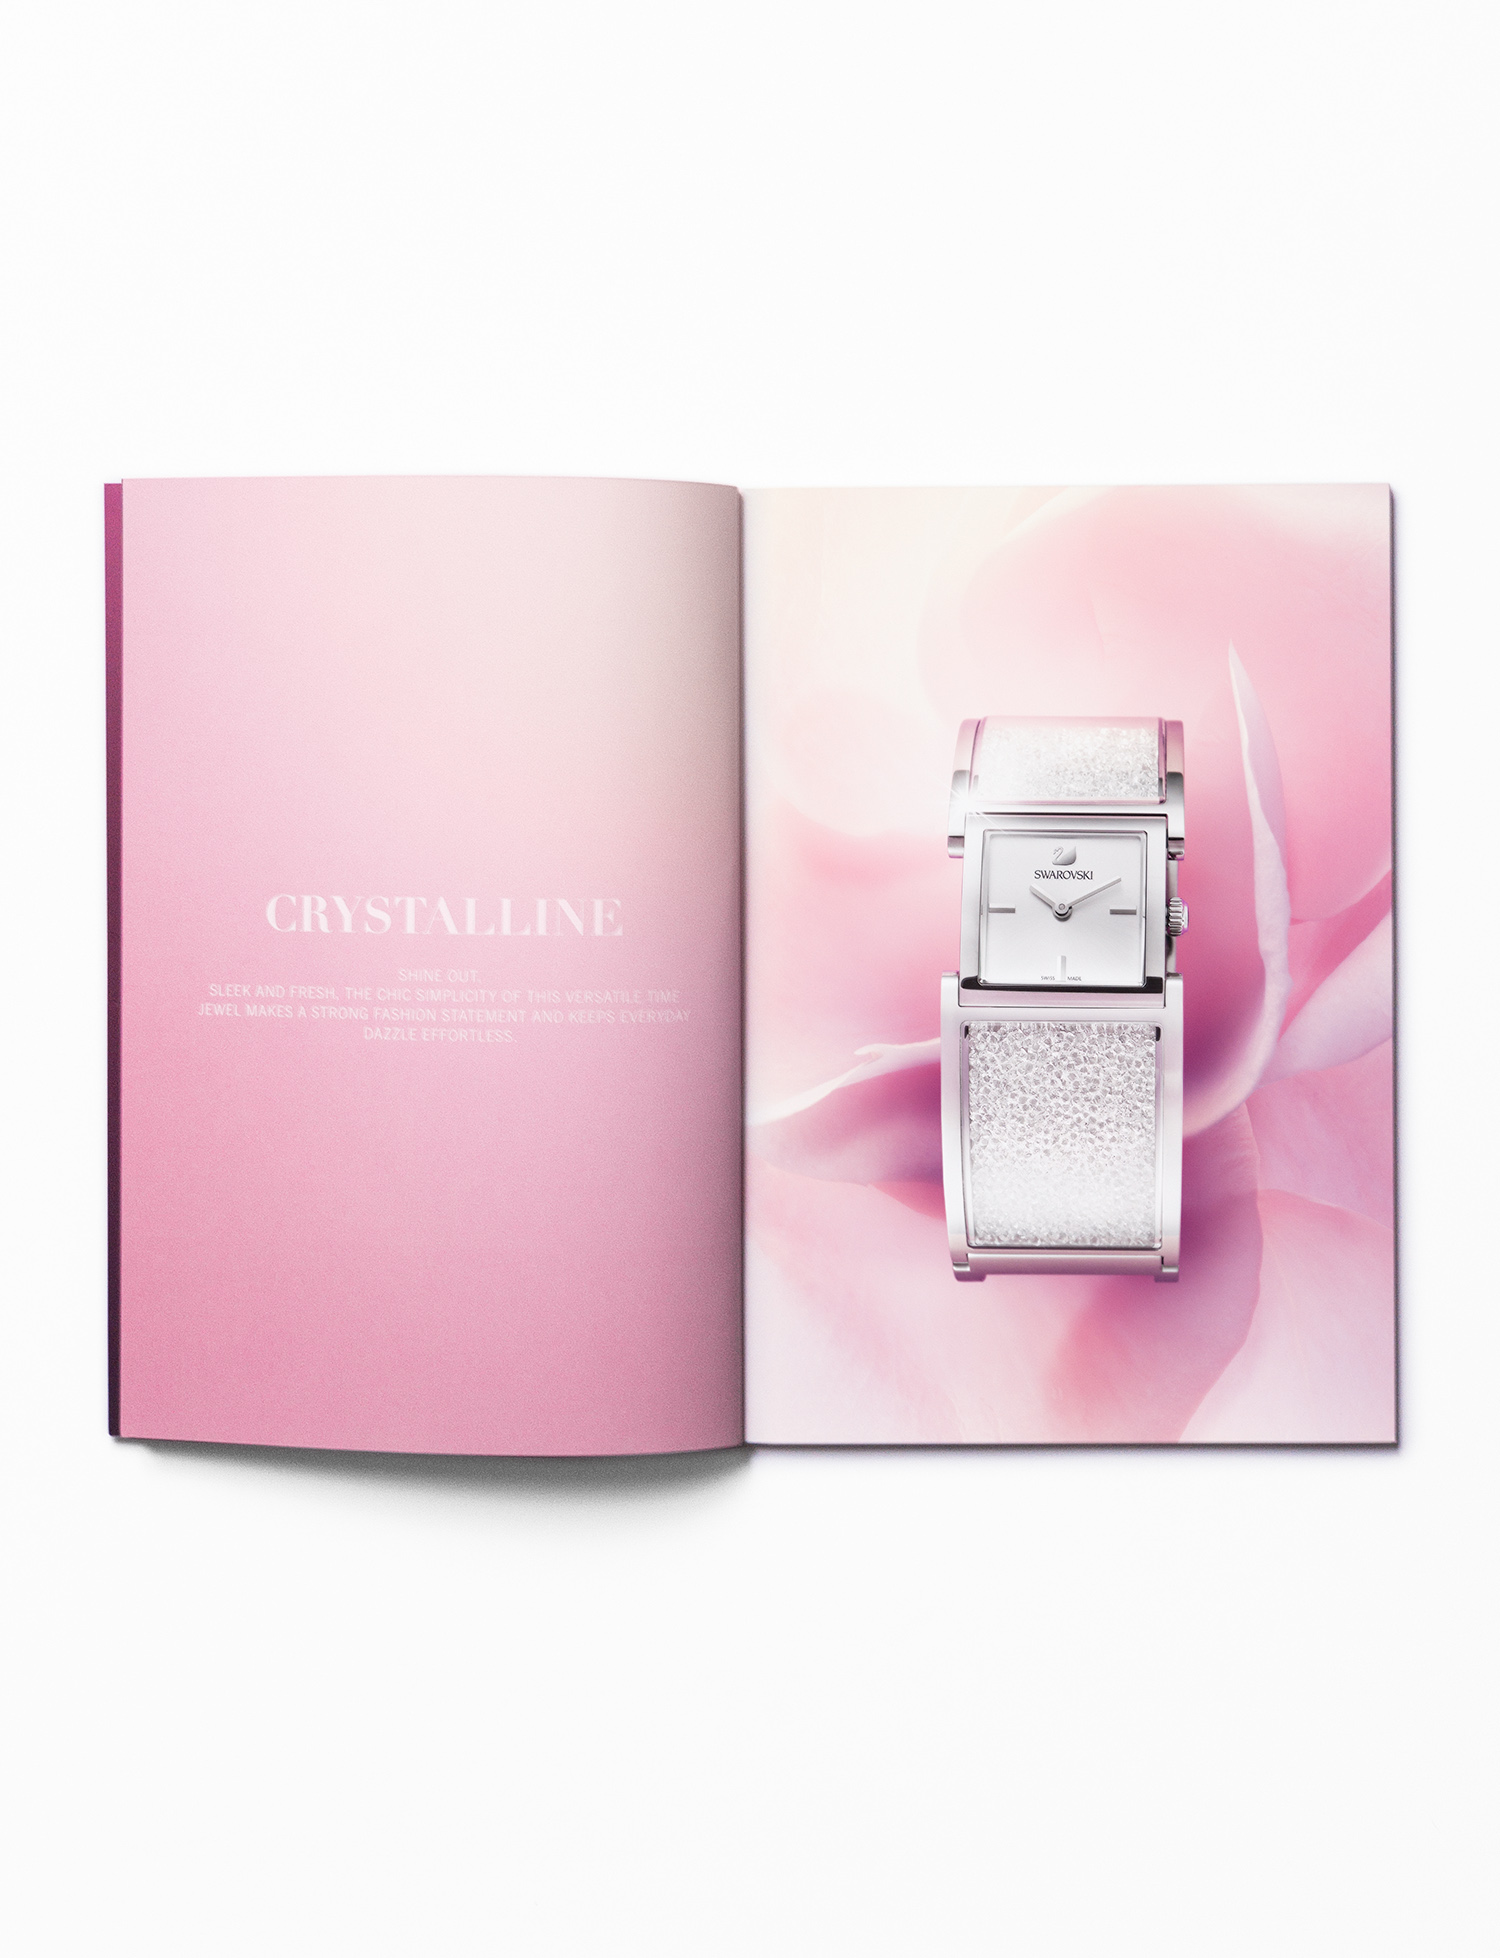 Christoph Sagel - Swarovski Watches Catalogue, In the Headroom